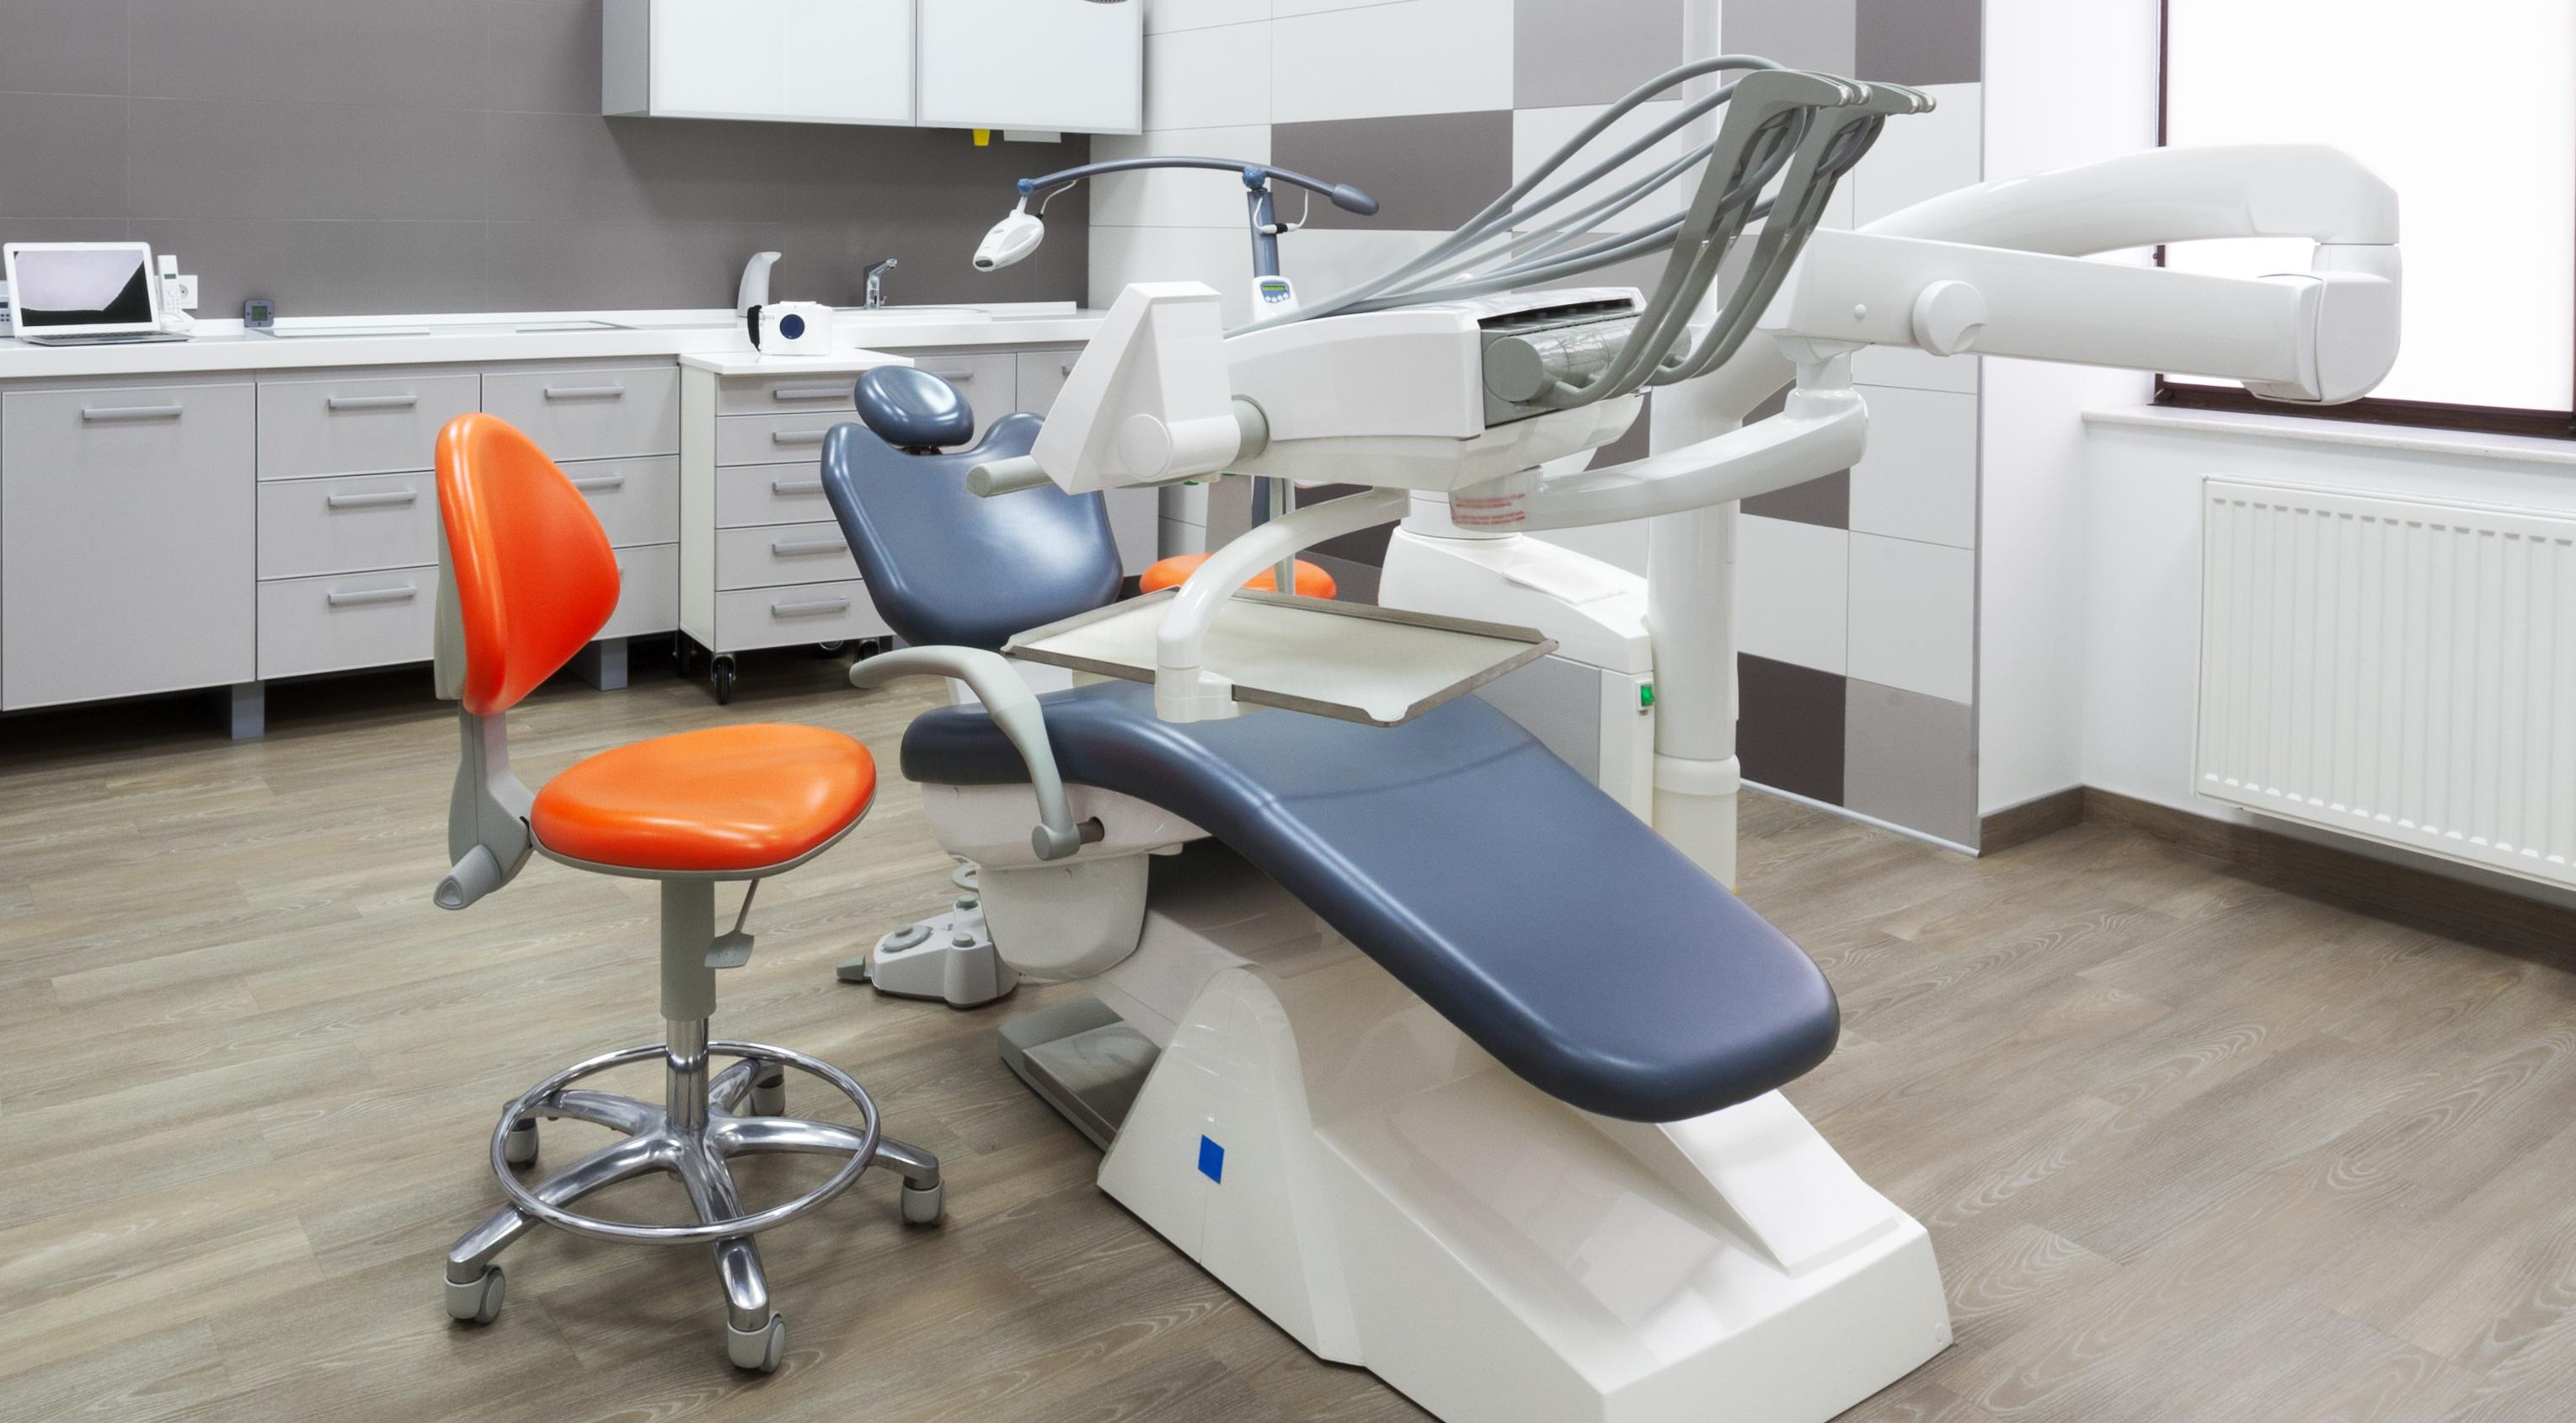 dentist's office with brand new equipment